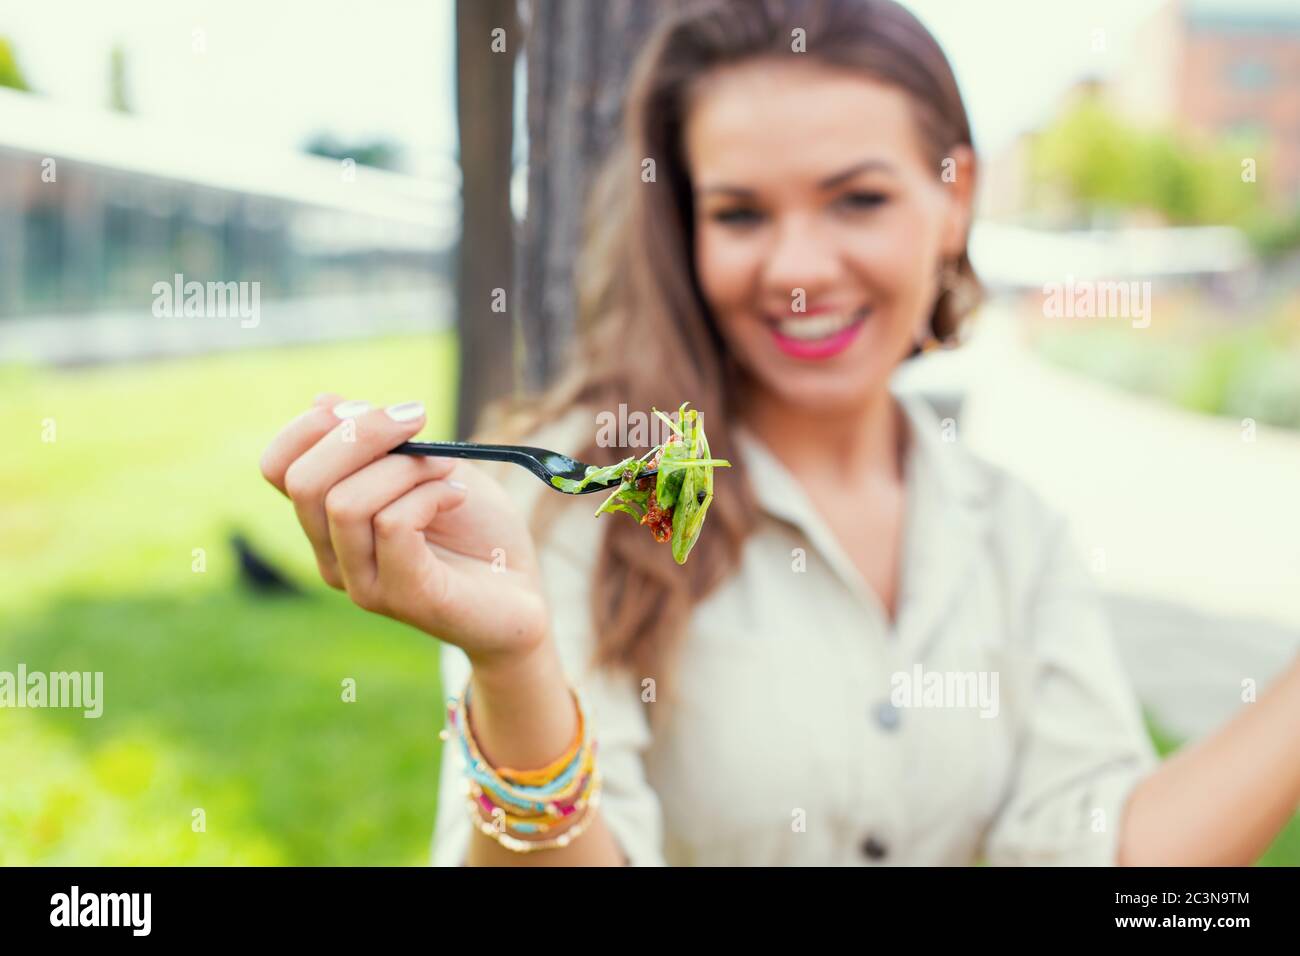 Young cheeerful latina woman holding salad, depth of field Stock Photo